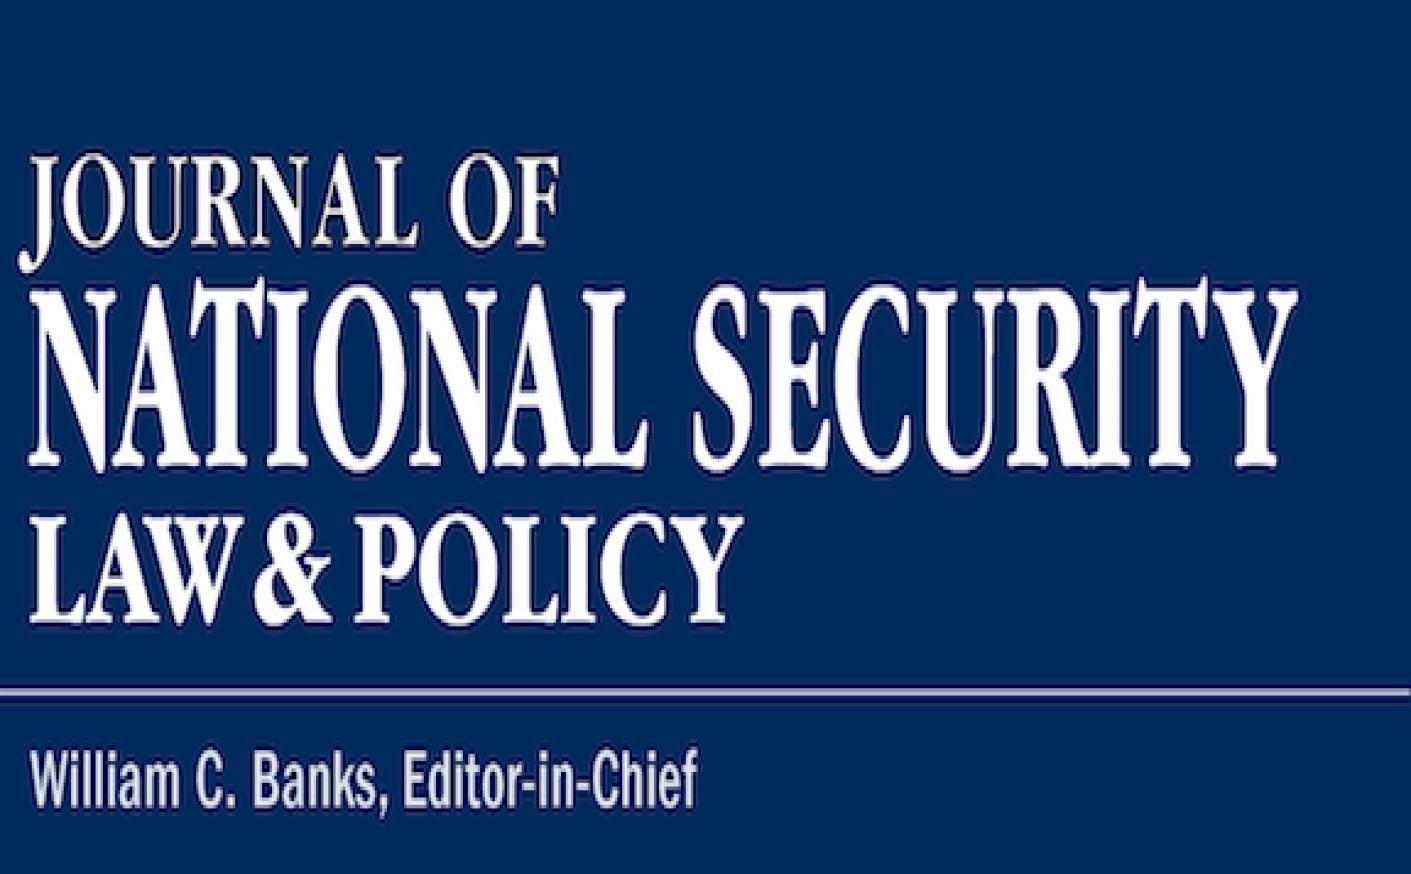 Journal of national security law & policy logo